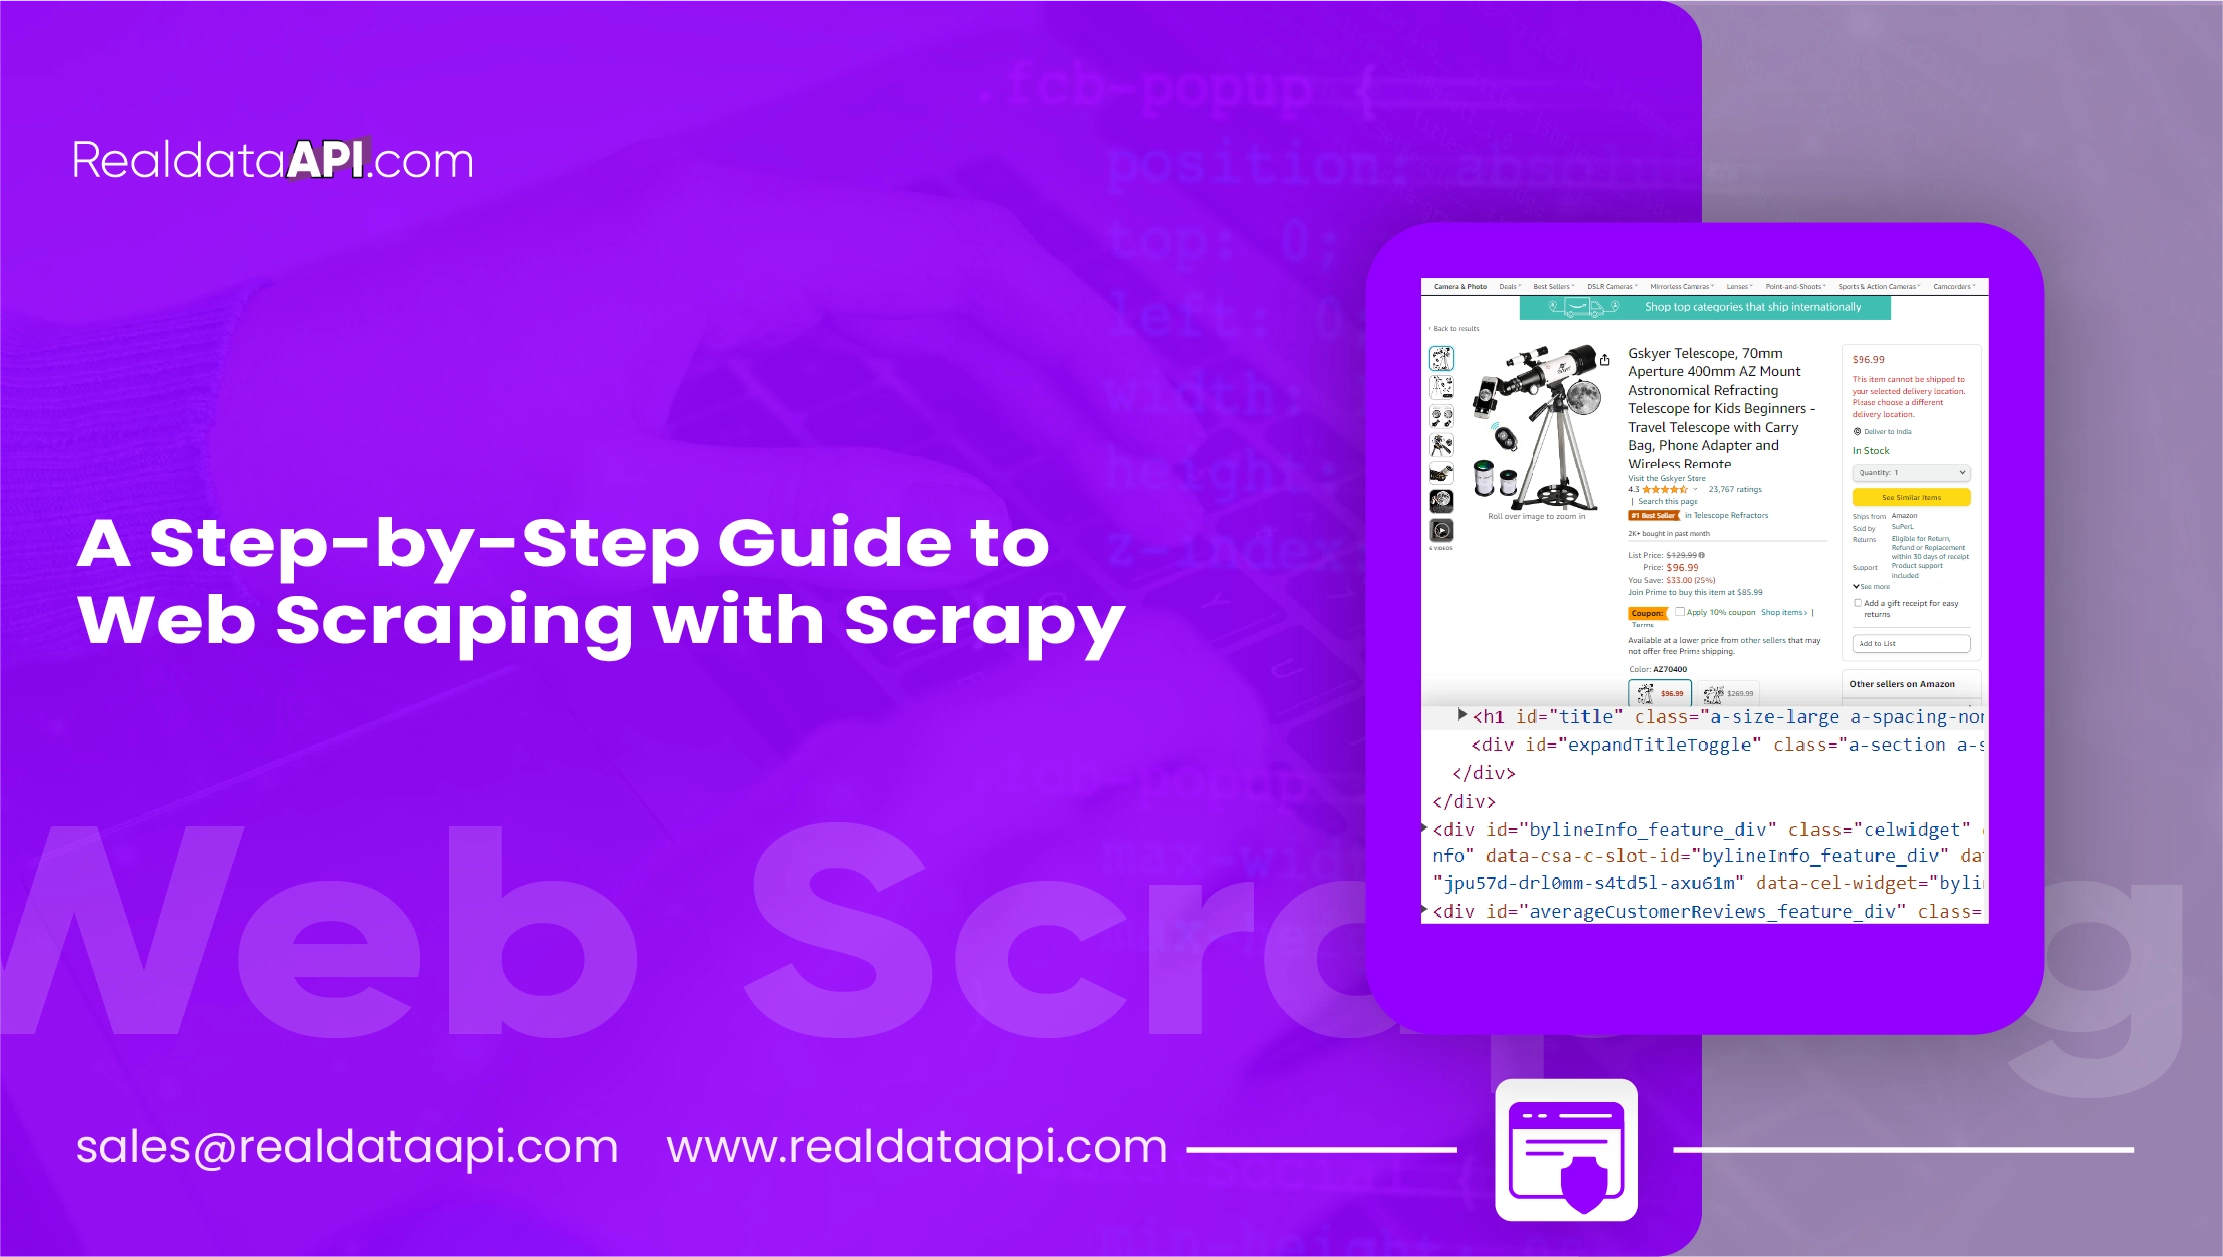 A-Step-by-Step-Guide-to-Web-Scraping-with-Scrapy-01